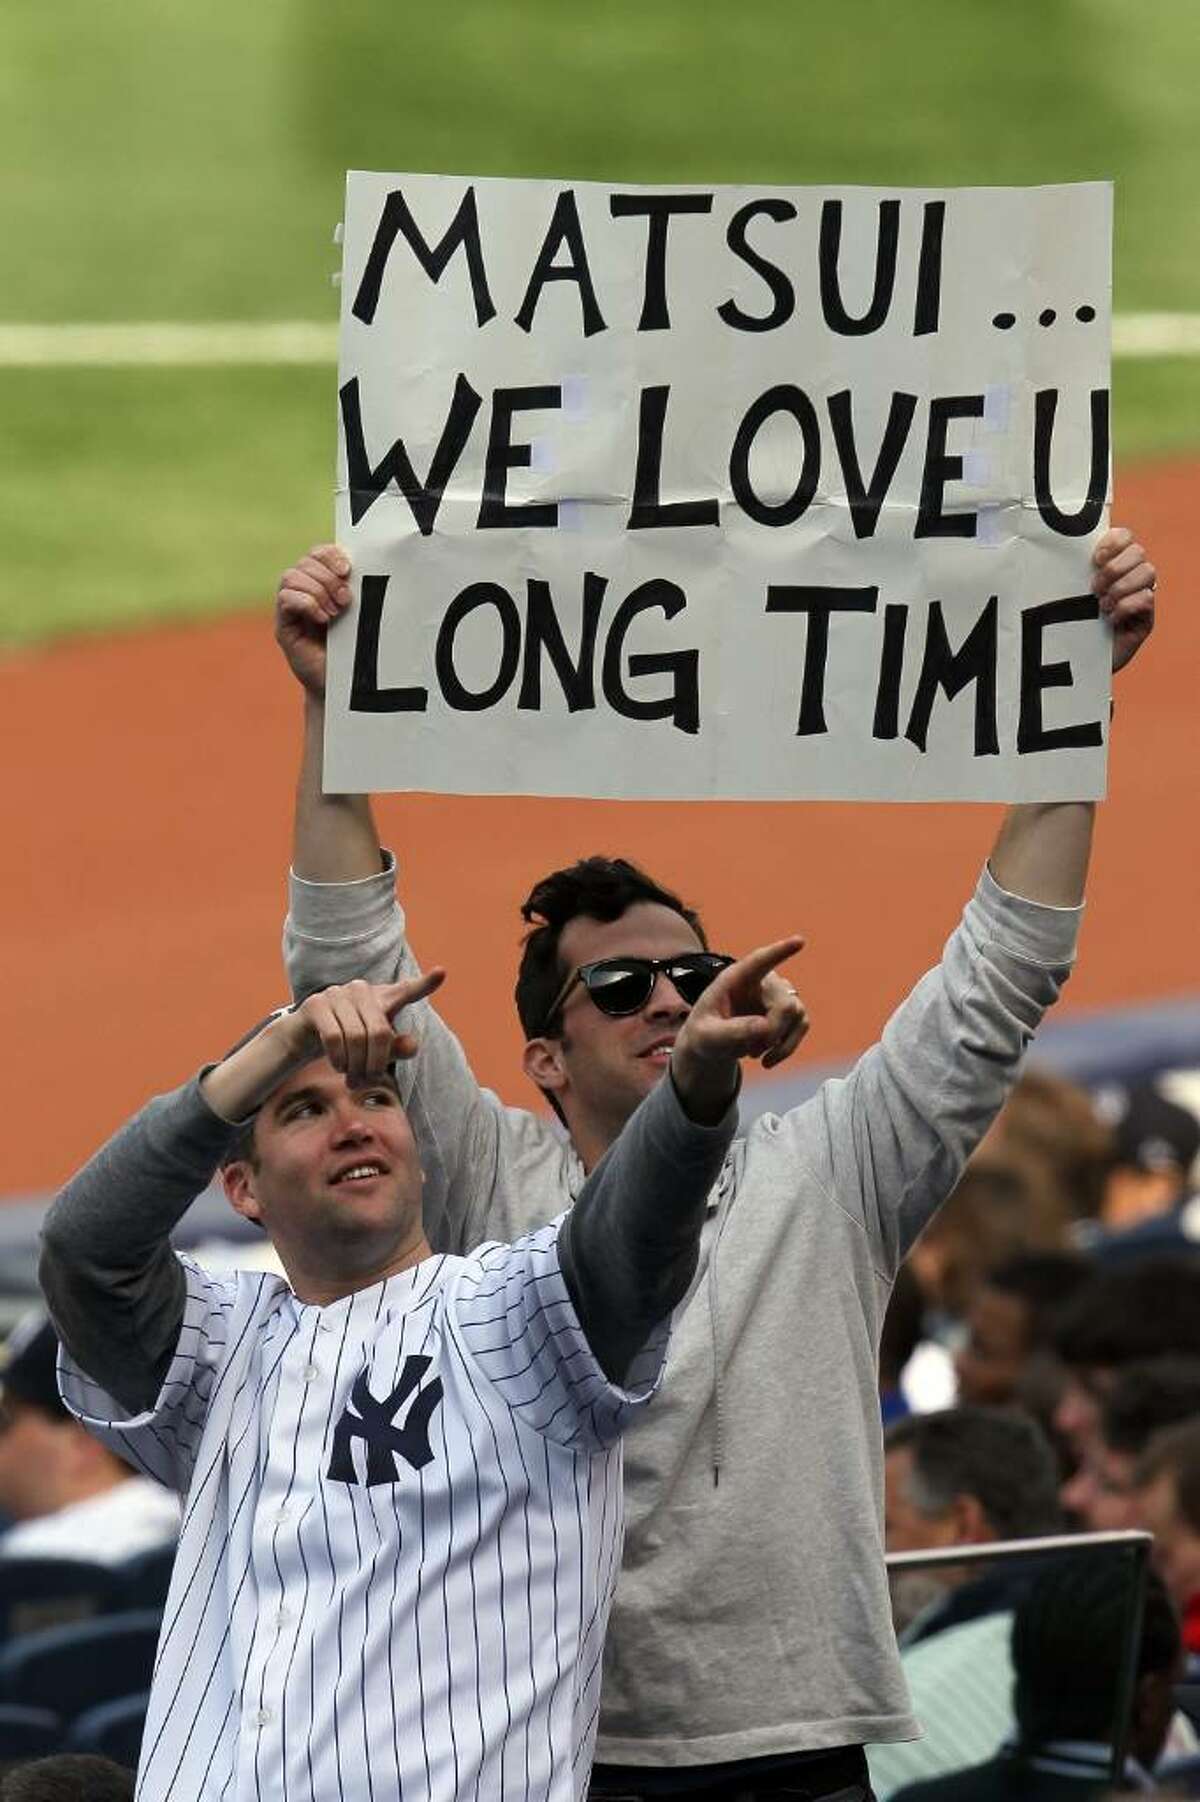 NEW YORK - APRIL 13: Fan of Hideki Matsui hold up a sign readiing "Matsui We Love U Long Time" as the New York Yankees play against the Los Angeles Angels of Anaheim during the Yankees home opener at Yankee Stadium on April 13, 2010 in the Bronx borough of New York City. (Photo by Chris McGrath/Getty Images)